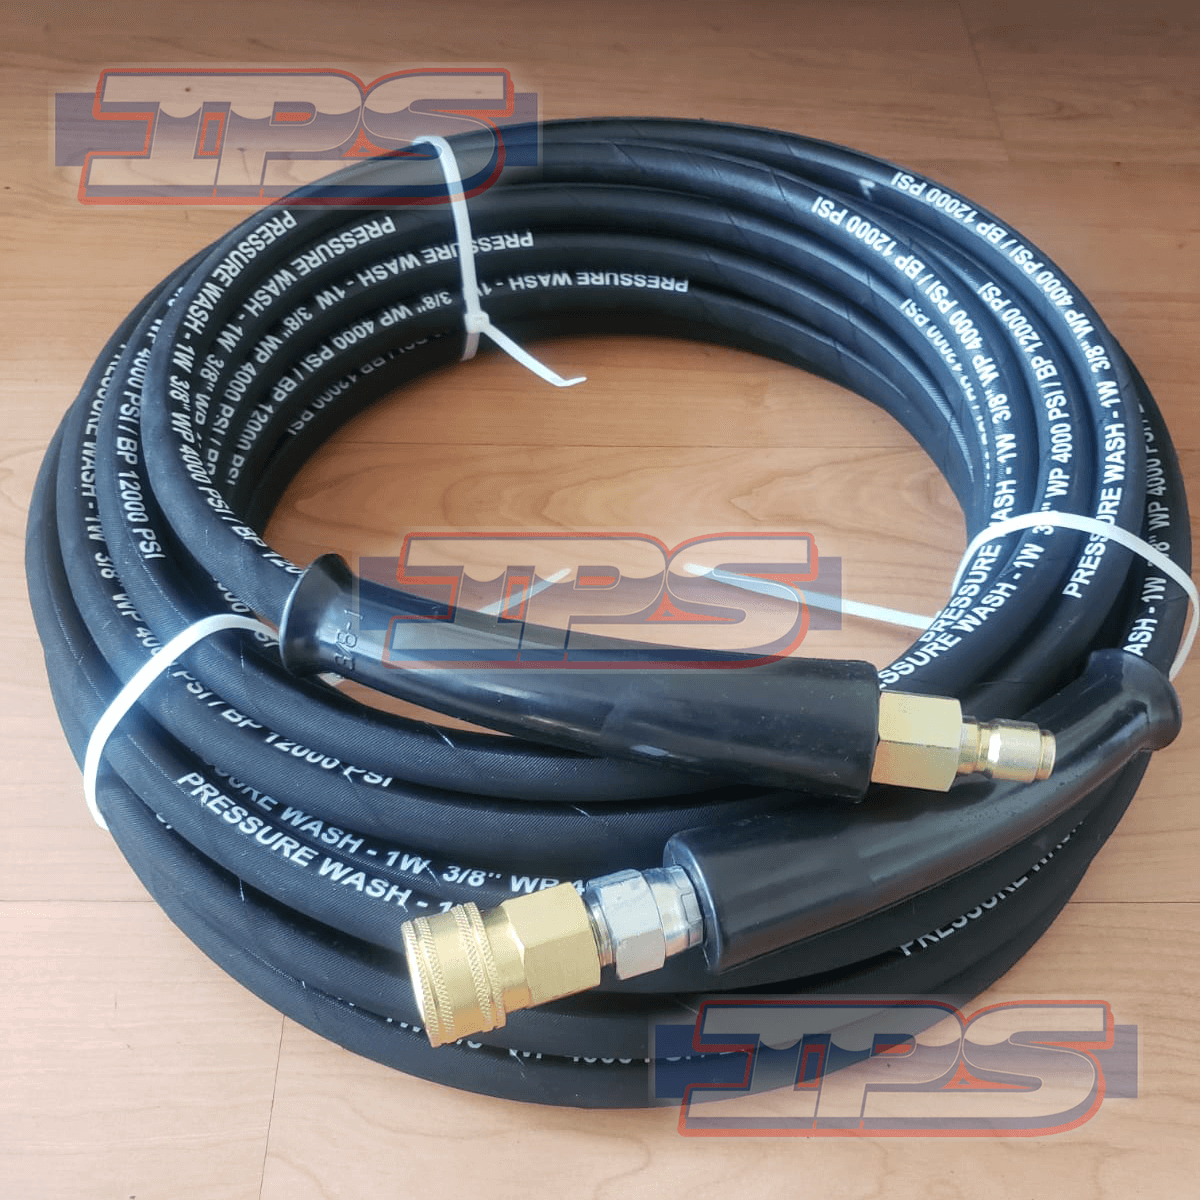 Pressure Washer Hose 3/8" x 50' 4000 psi W/ Quick Connects Couplers P/N 244783 